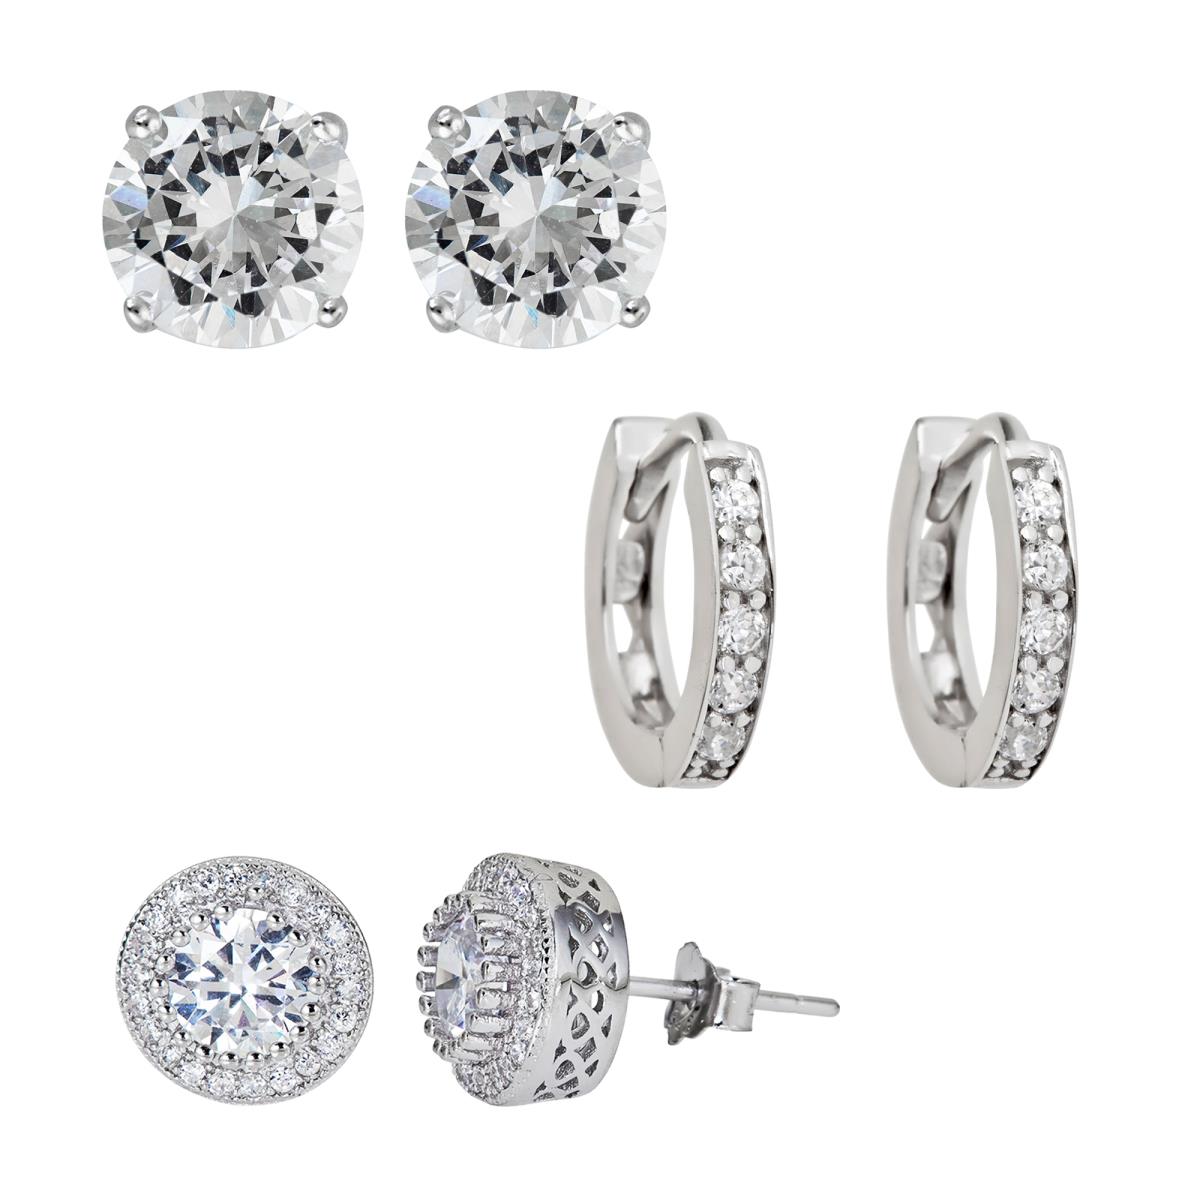 Sterling Silver Rhodium 5mm Rd Pave Halo, 8mm AAA Rd Solitaire Studs & Prong Set Huggies Earring Set